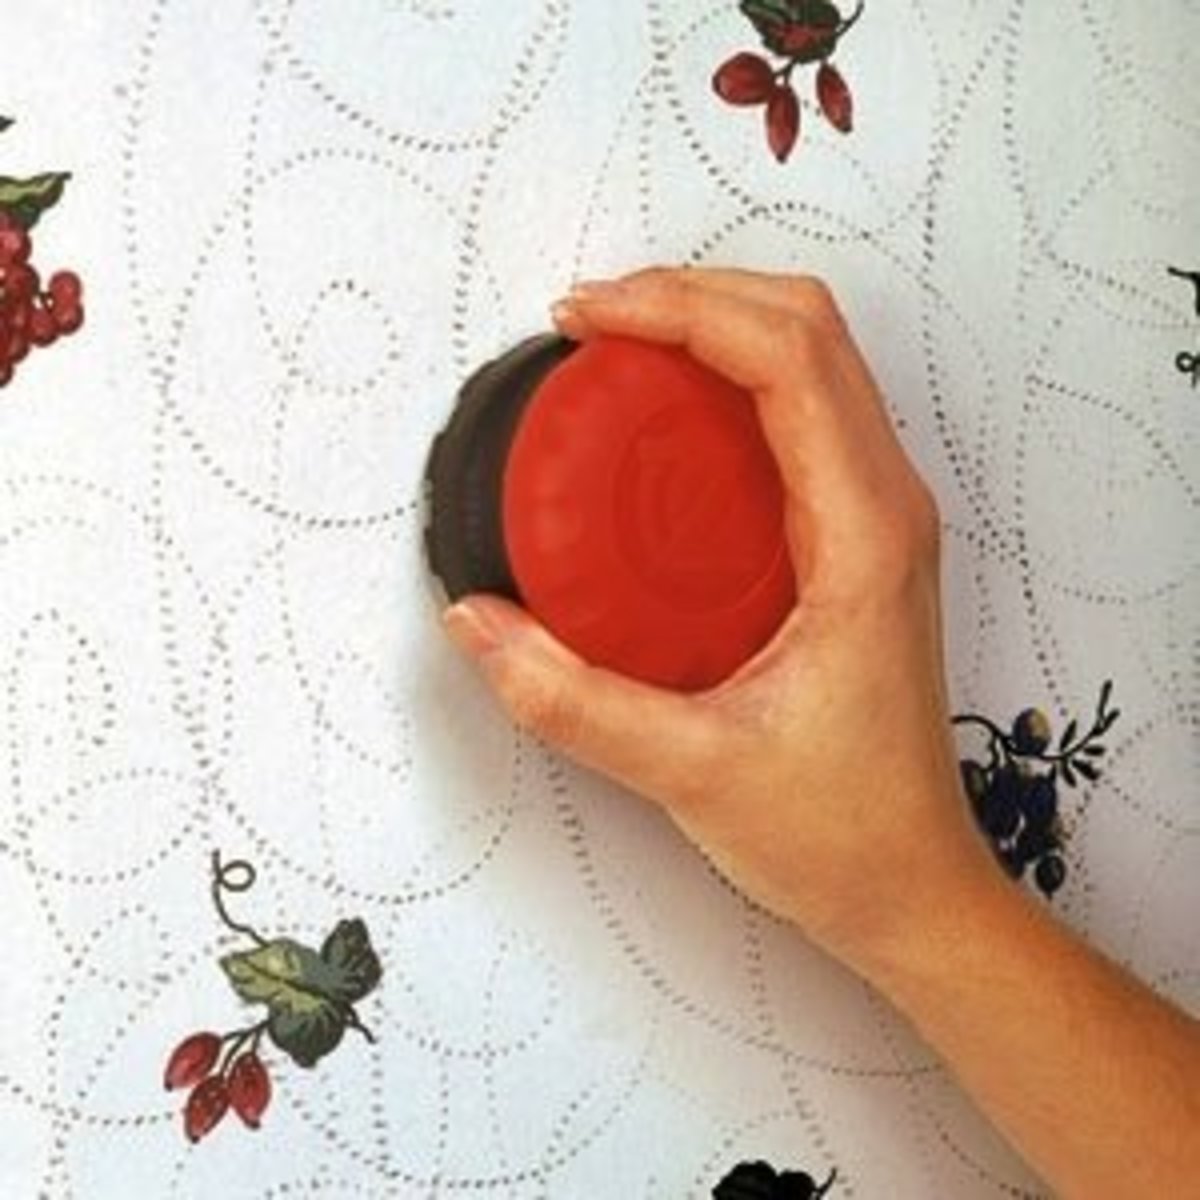 The Paper Tiger, wallpaper scoring tool. This tool comes in handy for removing old wallpaper.